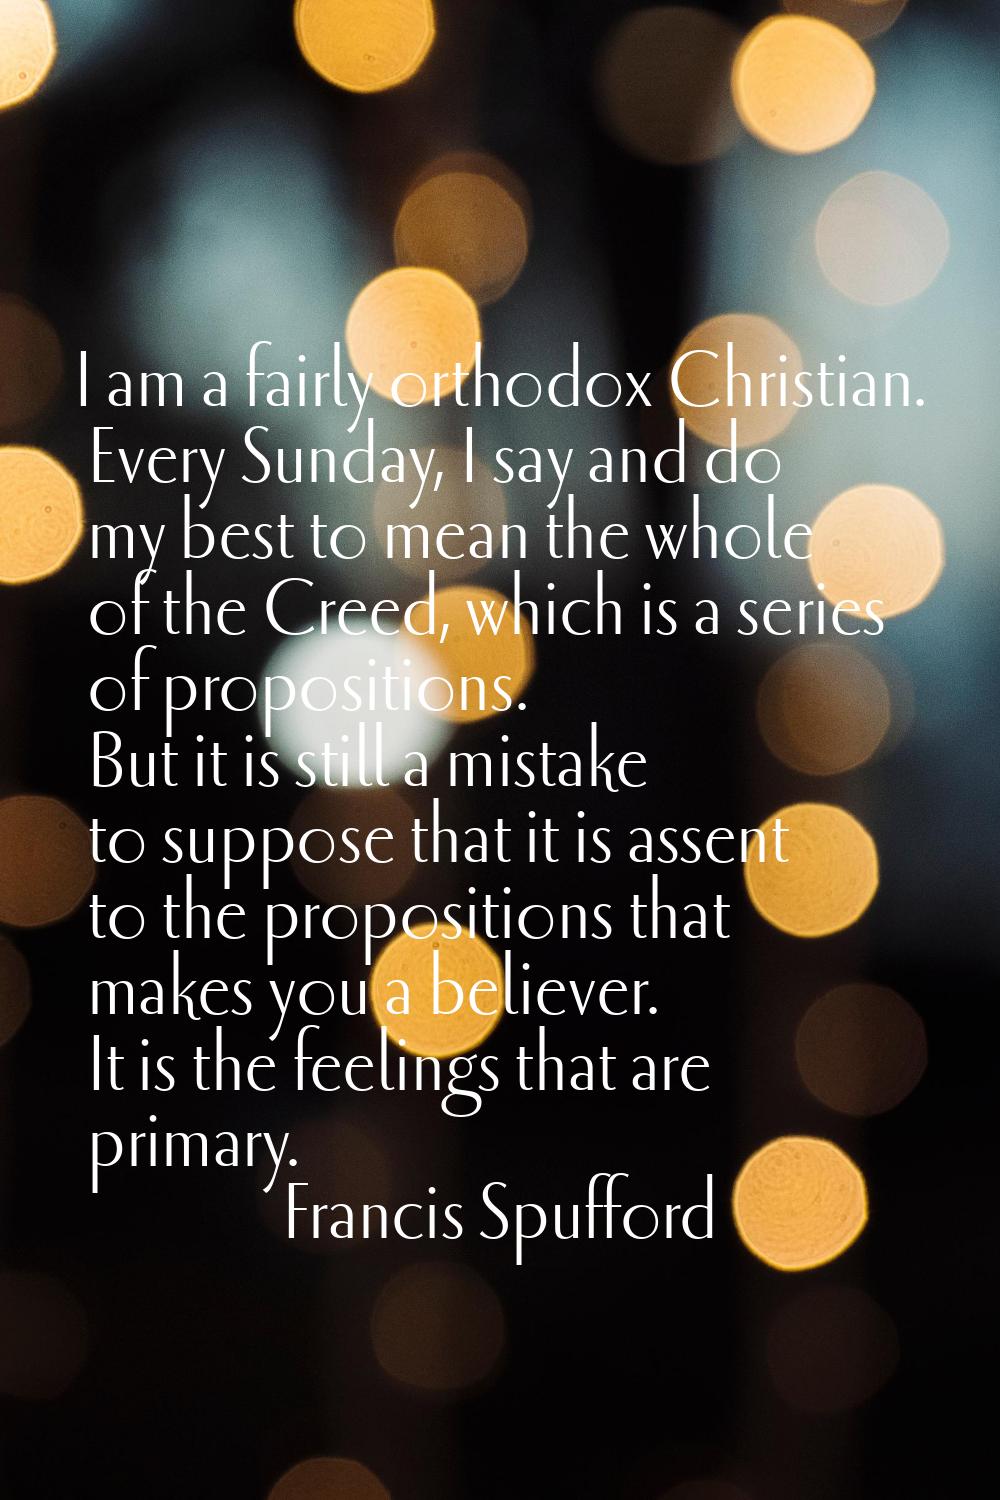 I am a fairly orthodox Christian. Every Sunday, I say and do my best to mean the whole of the Creed